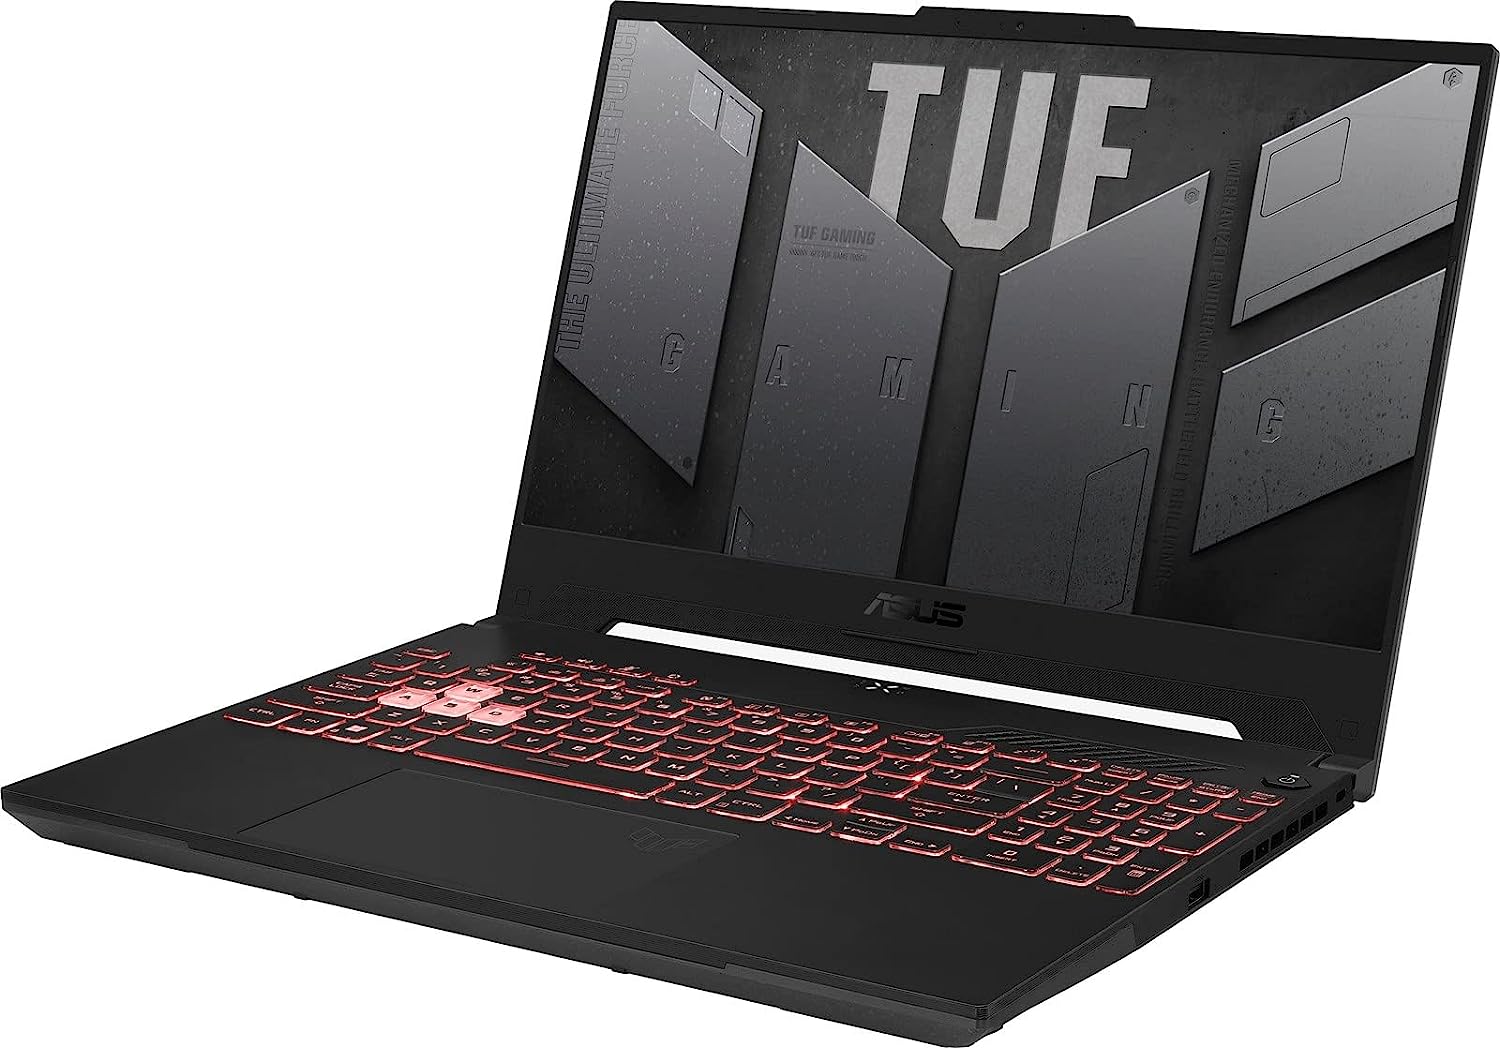 Asus TUF FA507RE-HN006W Price in Pakistan: Unveiling Power and Affordability